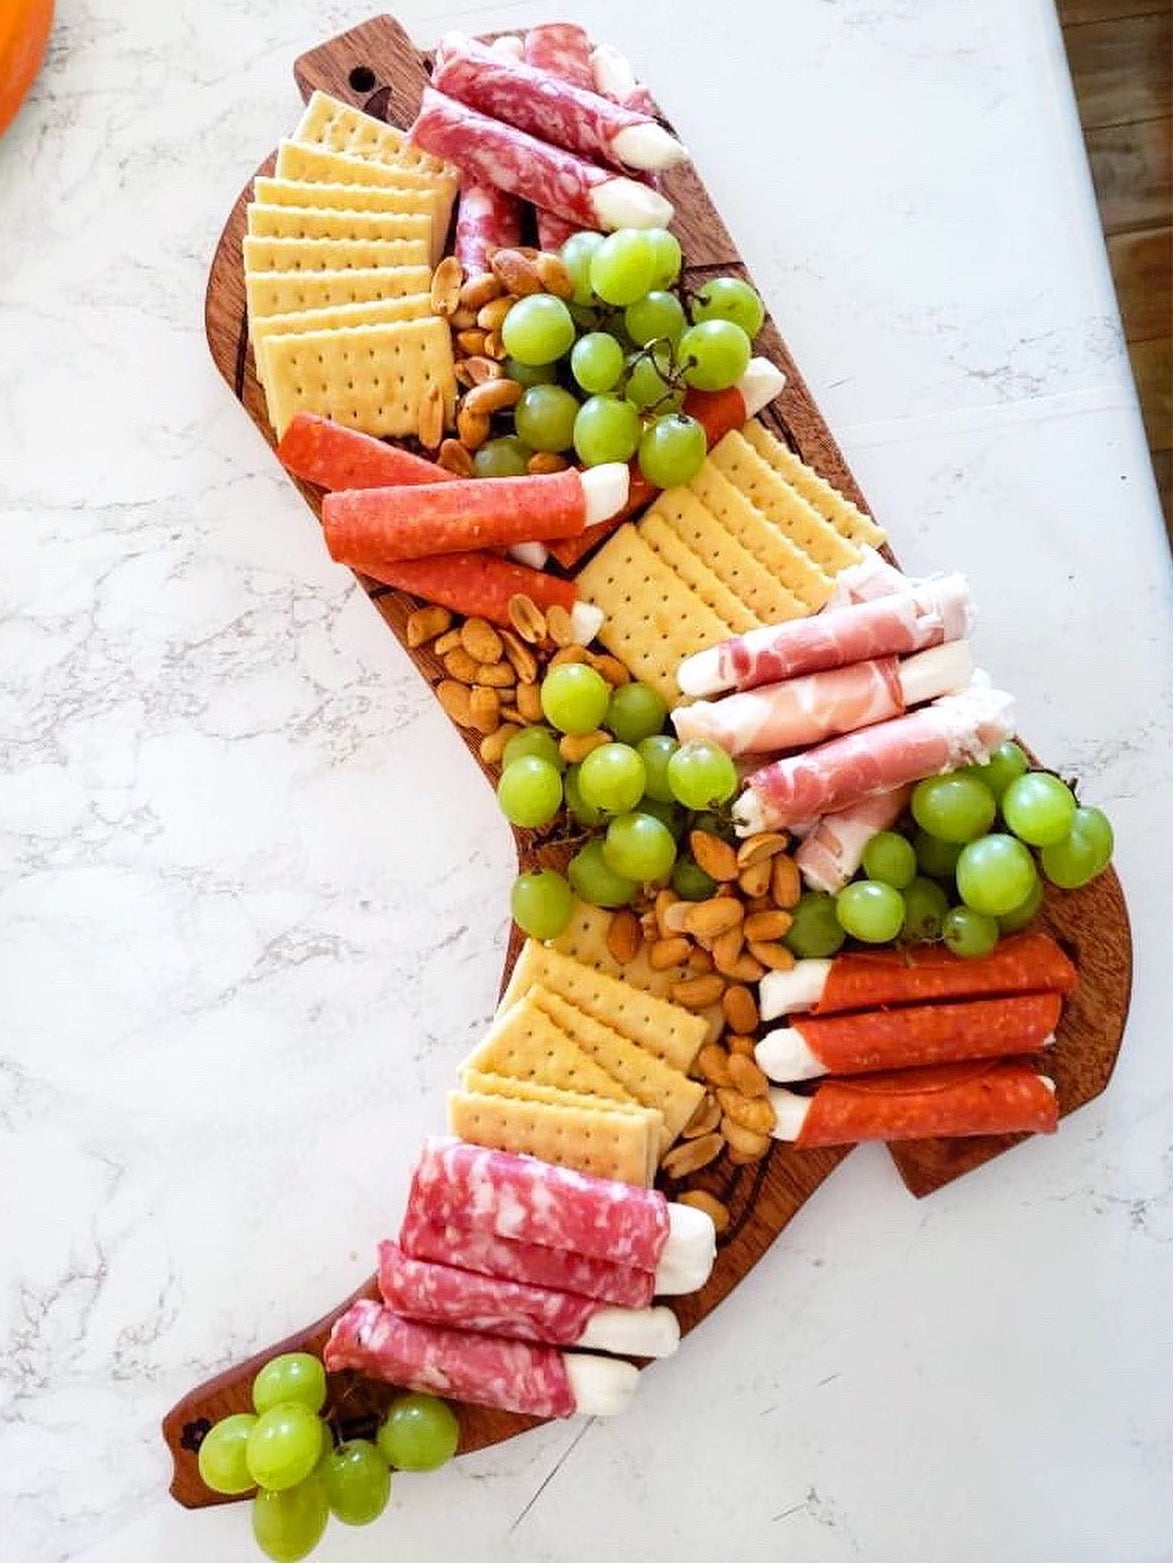 cowboy boot shaped charcuterie board